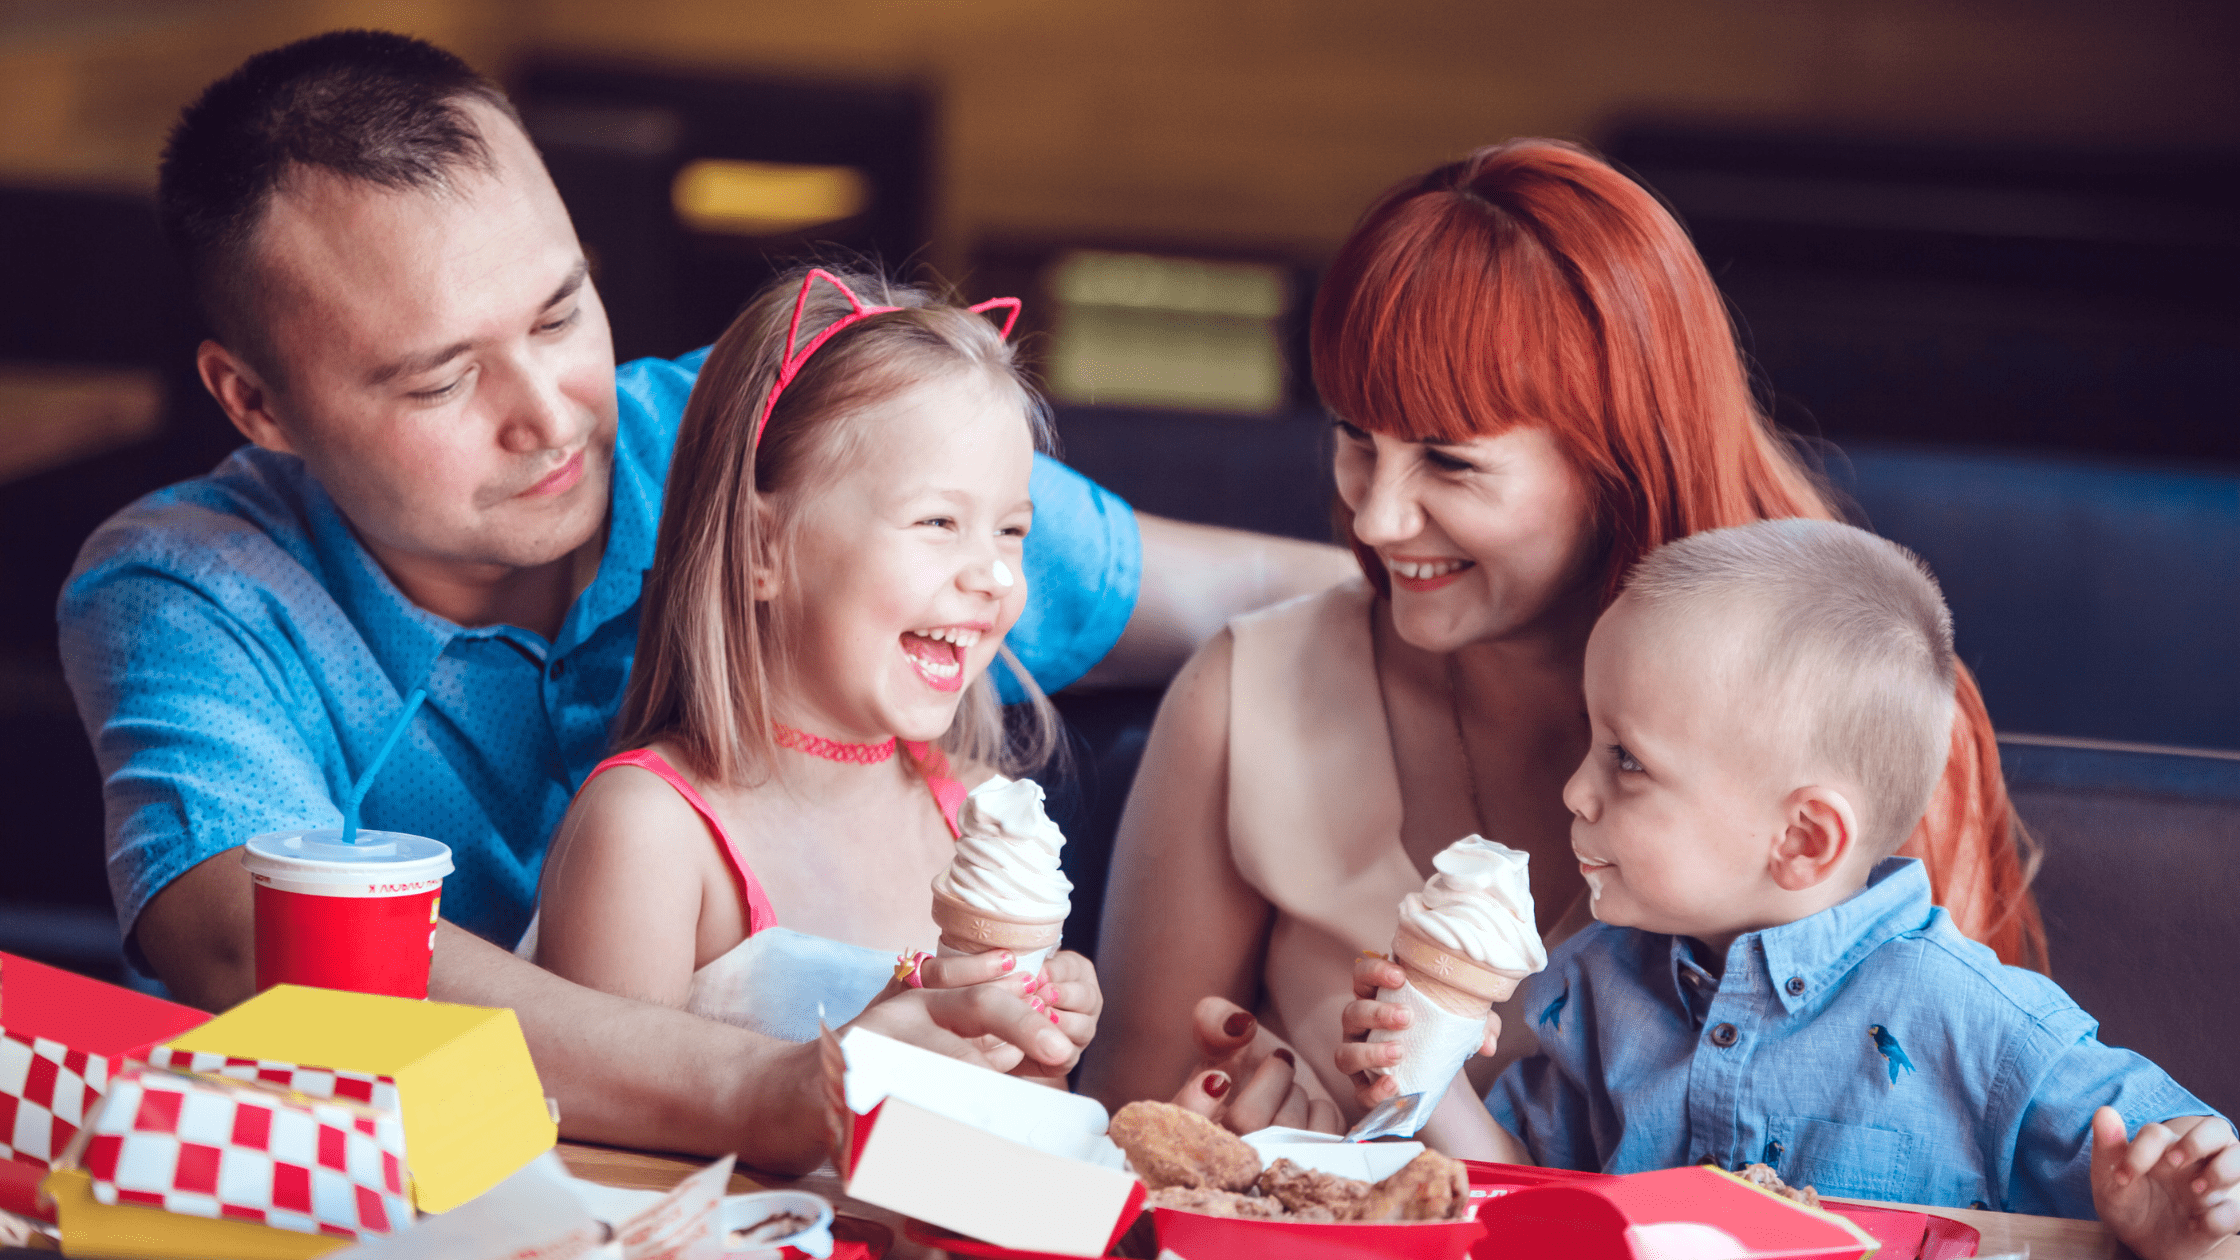 Family eating out during a military move PCS using tips to save money at restaurants